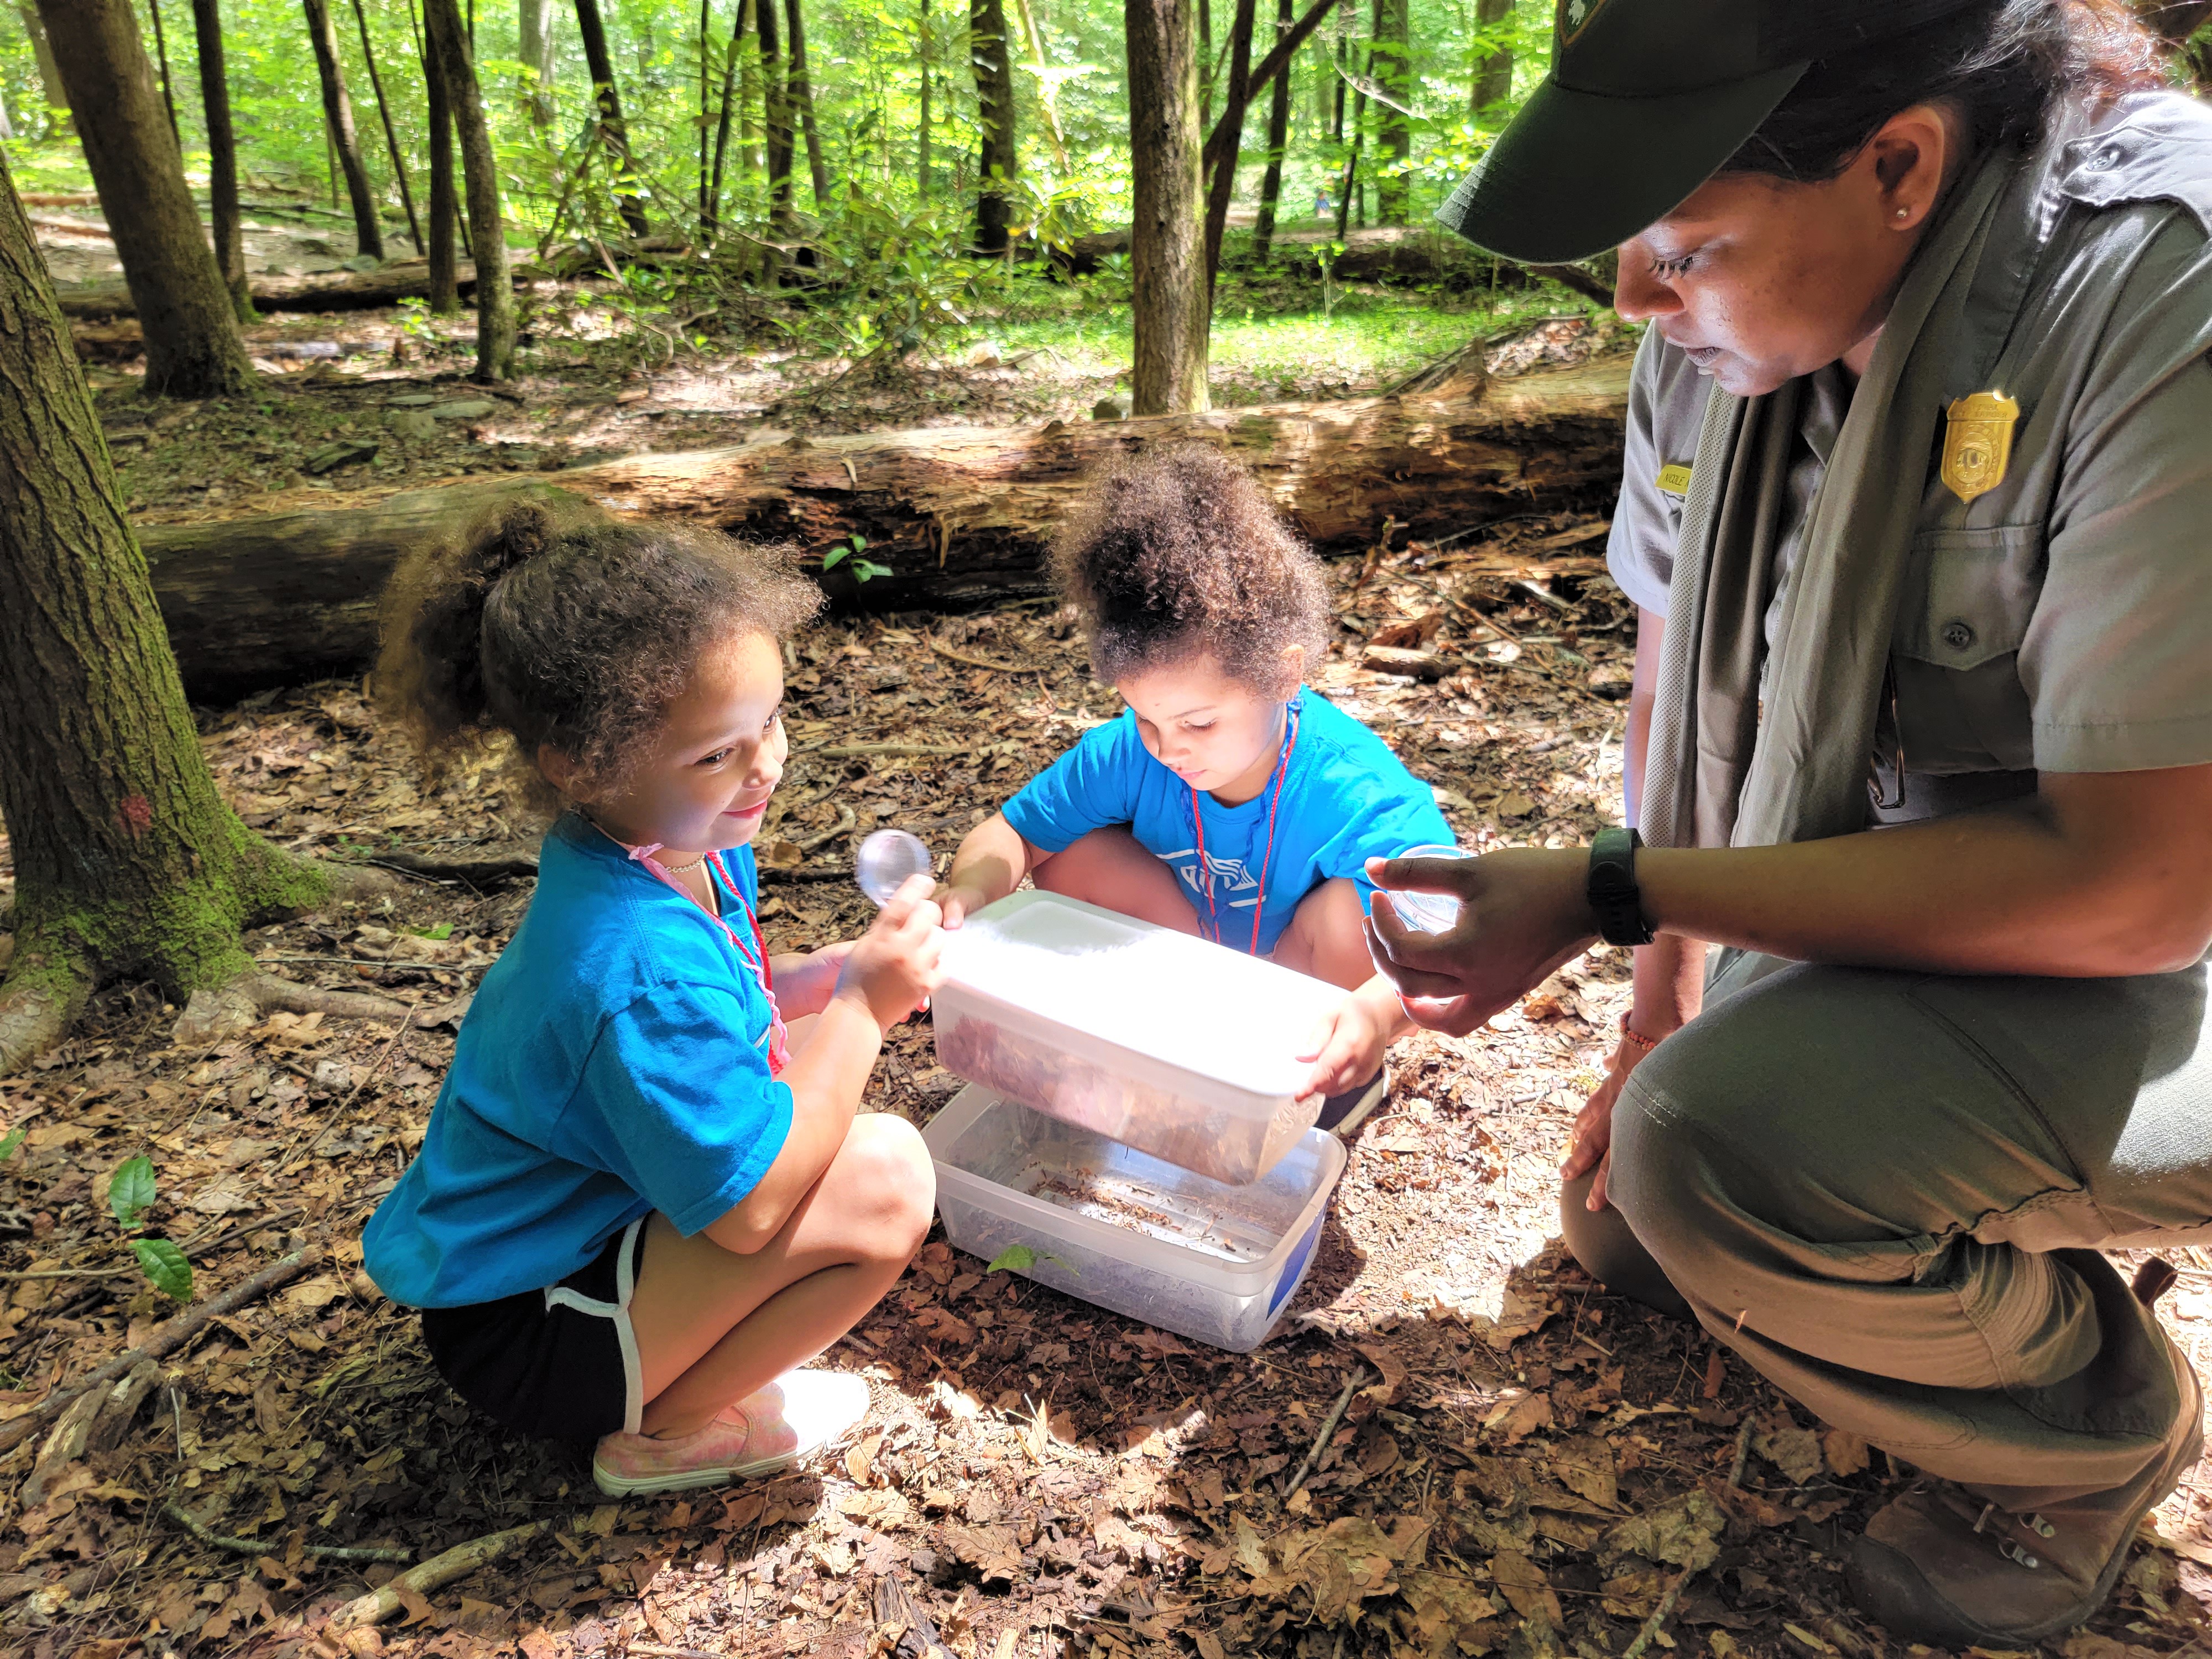 Connect Students With Outdoor STEM Learning Opportunities Alongside Science Professionals